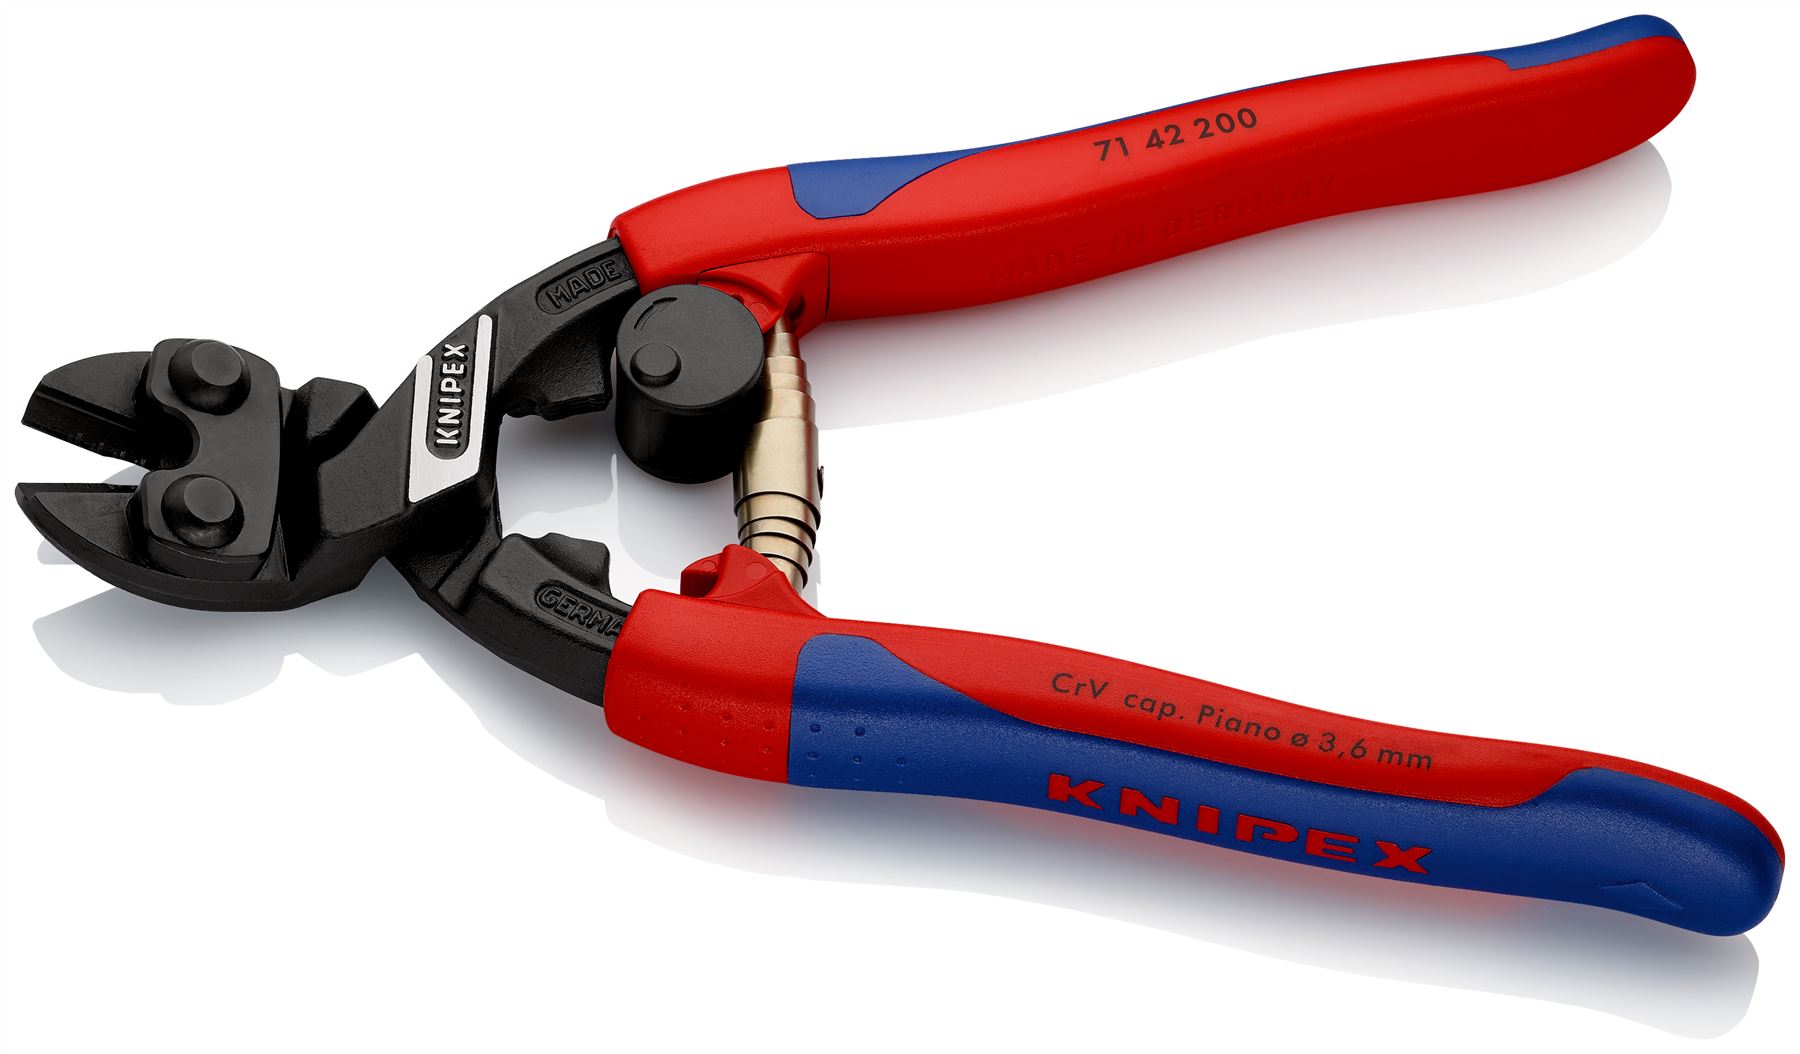 Knipex Cobolt Compact Bolt Cutters Cutting Pliers 200mm Multi Component Grips 71 42 200